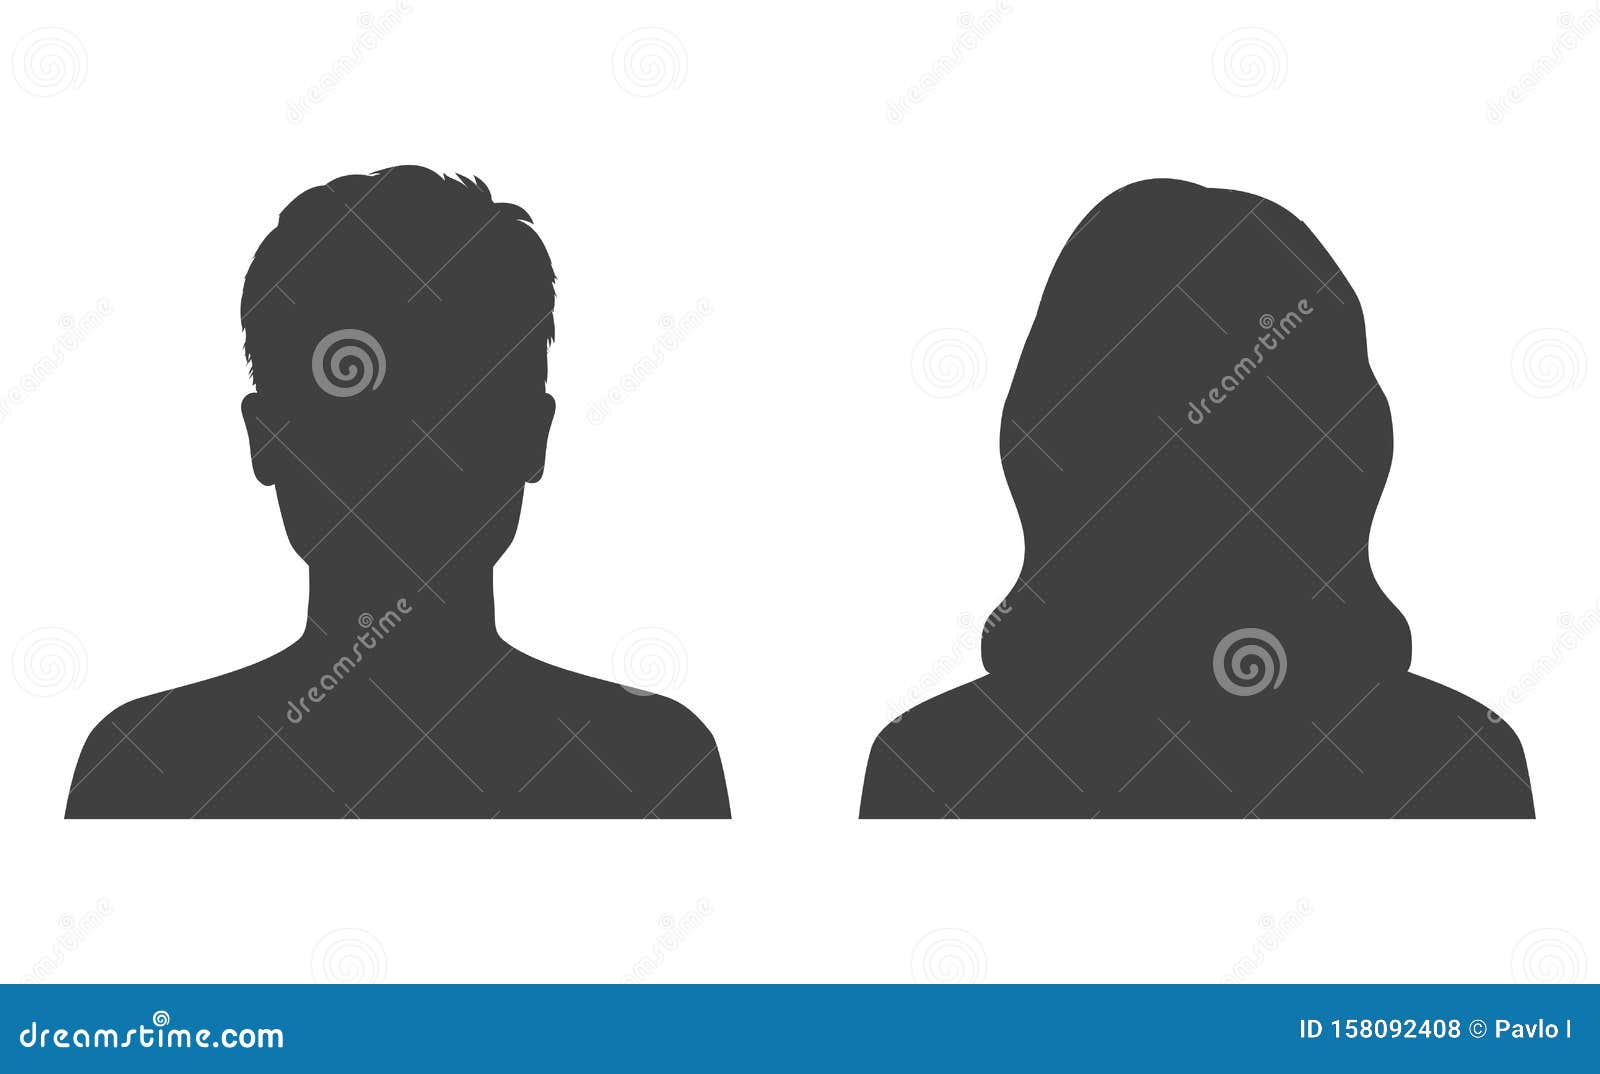 man and woman head icon silhouette. male and female avatar profile, face silhouette sign Ã¢â¬â 